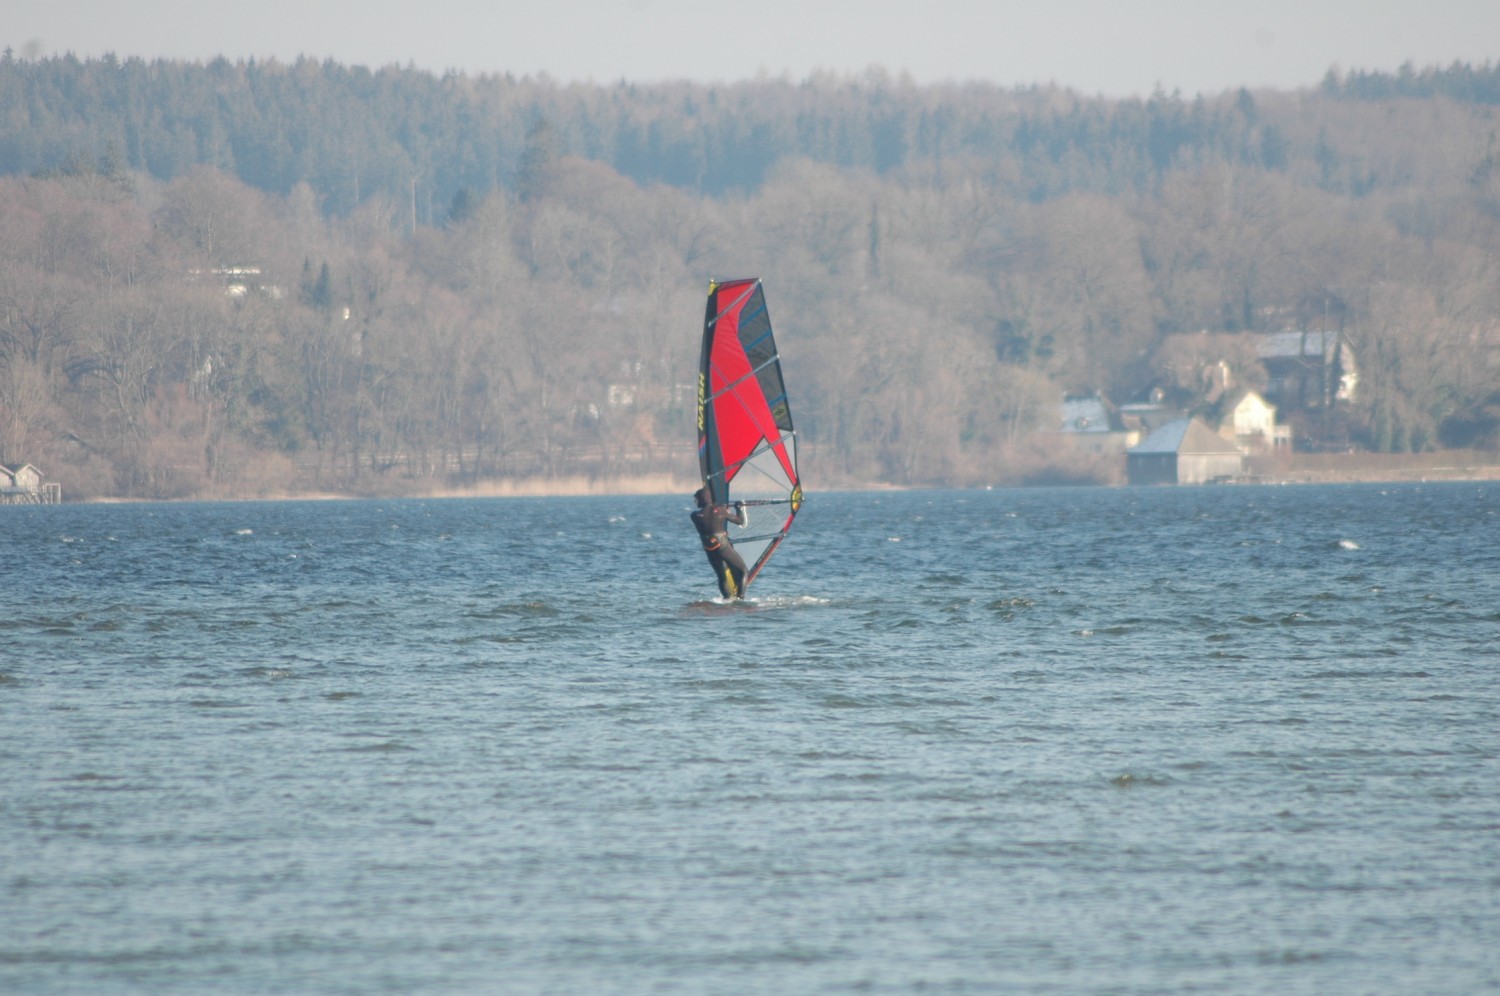 16.03.2016 - Eching am Ammersee